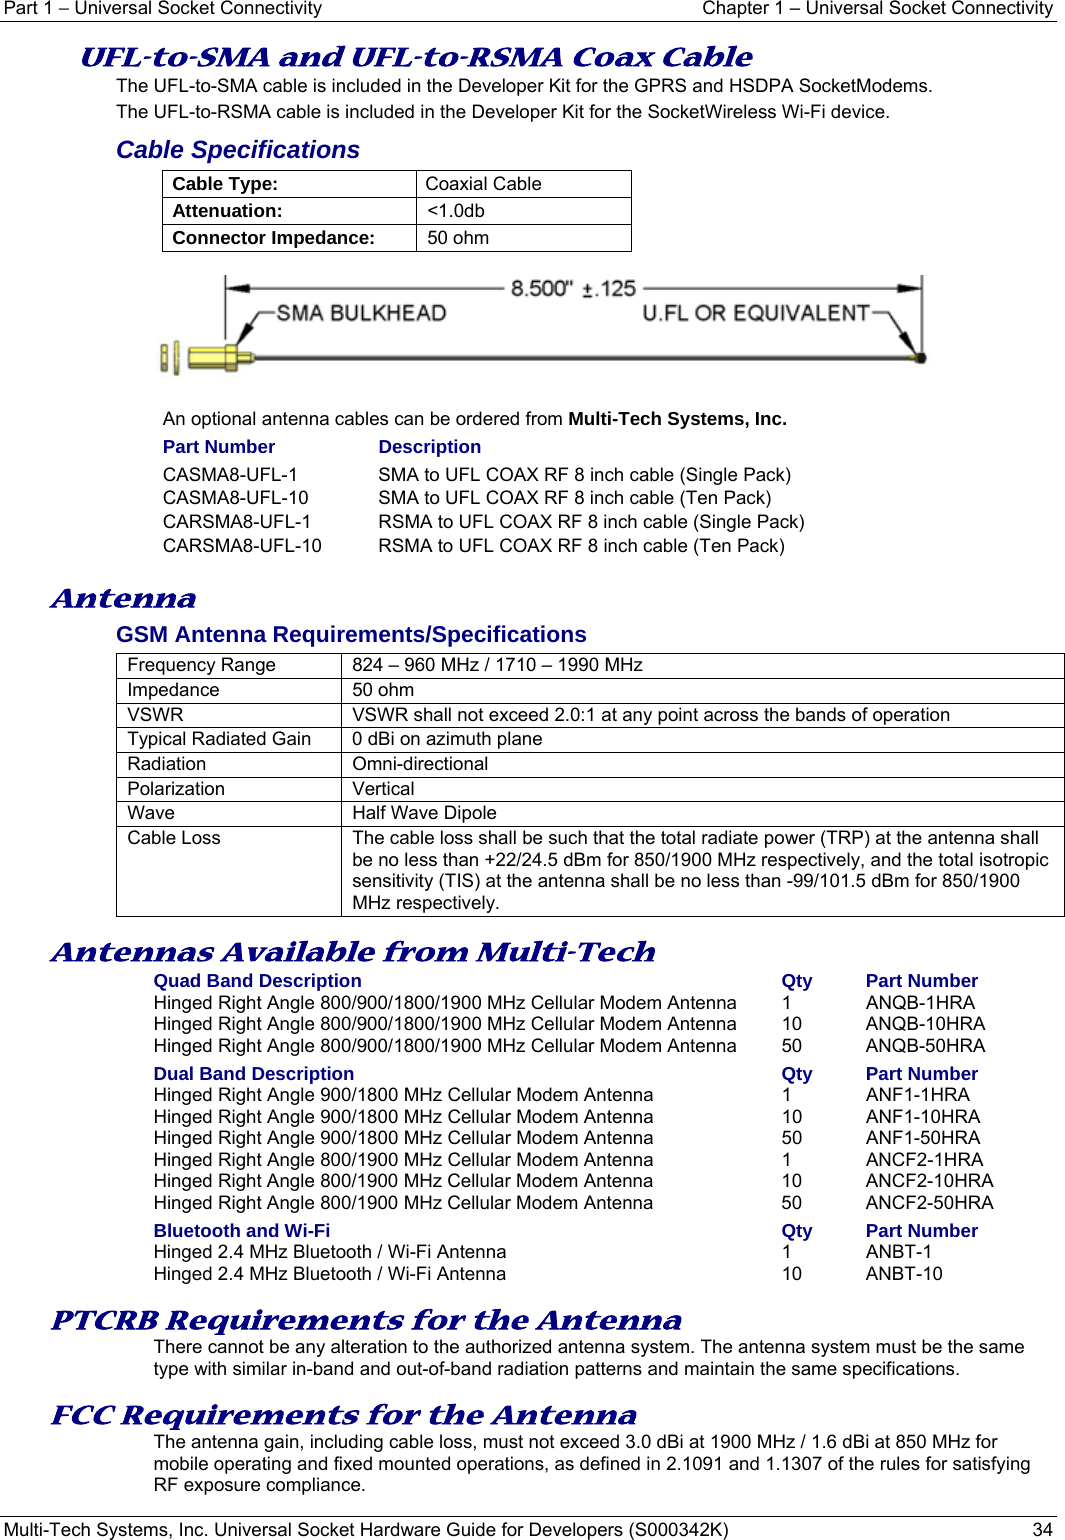 Part 1 − Universal Socket Connectivity    Chapter 1 – Universal Socket Connectivity Multi-Tech Systems, Inc. Universal Socket Hardware Guide for Developers (S000342K)  34  UFL-to-SMA and UFL-to-RSMA Coax Cable The UFL-to-SMA cable is included in the Developer Kit for the GPRS and HSDPA SocketModems. The UFL-to-RSMA cable is included in the Developer Kit for the SocketWireless Wi-Fi device. Cable Specifications Cable Type:  Coaxial Cable Attenuation:  &lt;1.0db Connector Impedance:  50 ohm   An optional antenna cables can be ordered from Multi-Tech Systems, Inc.  Part Number  Description CASMA8-UFL-1  SMA to UFL COAX RF 8 inch cable (Single Pack) CASMA8-UFL-10  SMA to UFL COAX RF 8 inch cable (Ten Pack)  CARSMA8-UFL-1  RSMA to UFL COAX RF 8 inch cable (Single Pack)   CARSMA8-UFL-10  RSMA to UFL COAX RF 8 inch cable (Ten Pack)    Antenna GSM Antenna Requirements/Specifications Frequency Range 824 – 960 MHz / 1710 – 1990 MHzImpedance 50 ohmVSWR VSWR shall not exceed 2.0:1 at any point across the bands of operationTypical Radiated Gain  0 dBi on azimuth plane Radiation Omni-directional Polarization Vertical Wave  Half Wave Dipole Cable Loss  The cable loss shall be such that the total radiate power (TRP) at the antenna shall be no less than +22/24.5 dBm for 850/1900 MHz respectively, and the total isotropic sensitivity (TIS) at the antenna shall be no less than -99/101.5 dBm for 850/1900 MHz respectively.   Antennas Available from Multi-Tech Quad Band Description  Qty  Part Number Hinged Right Angle 800/900/1800/1900 MHz Cellular Modem Antenna    1  ANQB-1HRA   Hinged Right Angle 800/900/1800/1900 MHz Cellular Modem Antenna  10  ANQB-10HRA Hinged Right Angle 800/900/1800/1900 MHz Cellular Modem Antenna  50  ANQB-50HRA Dual Band Description  Qty  Part Number Hinged Right Angle 900/1800 MHz Cellular Modem Antenna    1  ANF1-1HRA   Hinged Right Angle 900/1800 MHz Cellular Modem Antenna    10  ANF1-10HRA   Hinged Right Angle 900/1800 MHz Cellular Modem Antenna    50  ANF1-50HRA   Hinged Right Angle 800/1900 MHz Cellular Modem Antenna    1  ANCF2-1HRA Hinged Right Angle 800/1900 MHz Cellular Modem Antenna    10  ANCF2-10HRA Hinged Right Angle 800/1900 MHz Cellular Modem Antenna    50  ANCF2-50HRA Bluetooth and Wi-Fi   Qty  Part Number Hinged 2.4 MHz Bluetooth / Wi-Fi Antenna  1  ANBT-1 Hinged 2.4 MHz Bluetooth / Wi-Fi Antenna  10  ANBT-10  PTCRB Requirements for the Antenna There cannot be any alteration to the authorized antenna system. The antenna system must be the same type with similar in-band and out-of-band radiation patterns and maintain the same specifications.   FCC Requirements for the Antenna The antenna gain, including cable loss, must not exceed 3.0 dBi at 1900 MHz / 1.6 dBi at 850 MHz for mobile operating and fixed mounted operations, as defined in 2.1091 and 1.1307 of the rules for satisfying RF exposure compliance. 